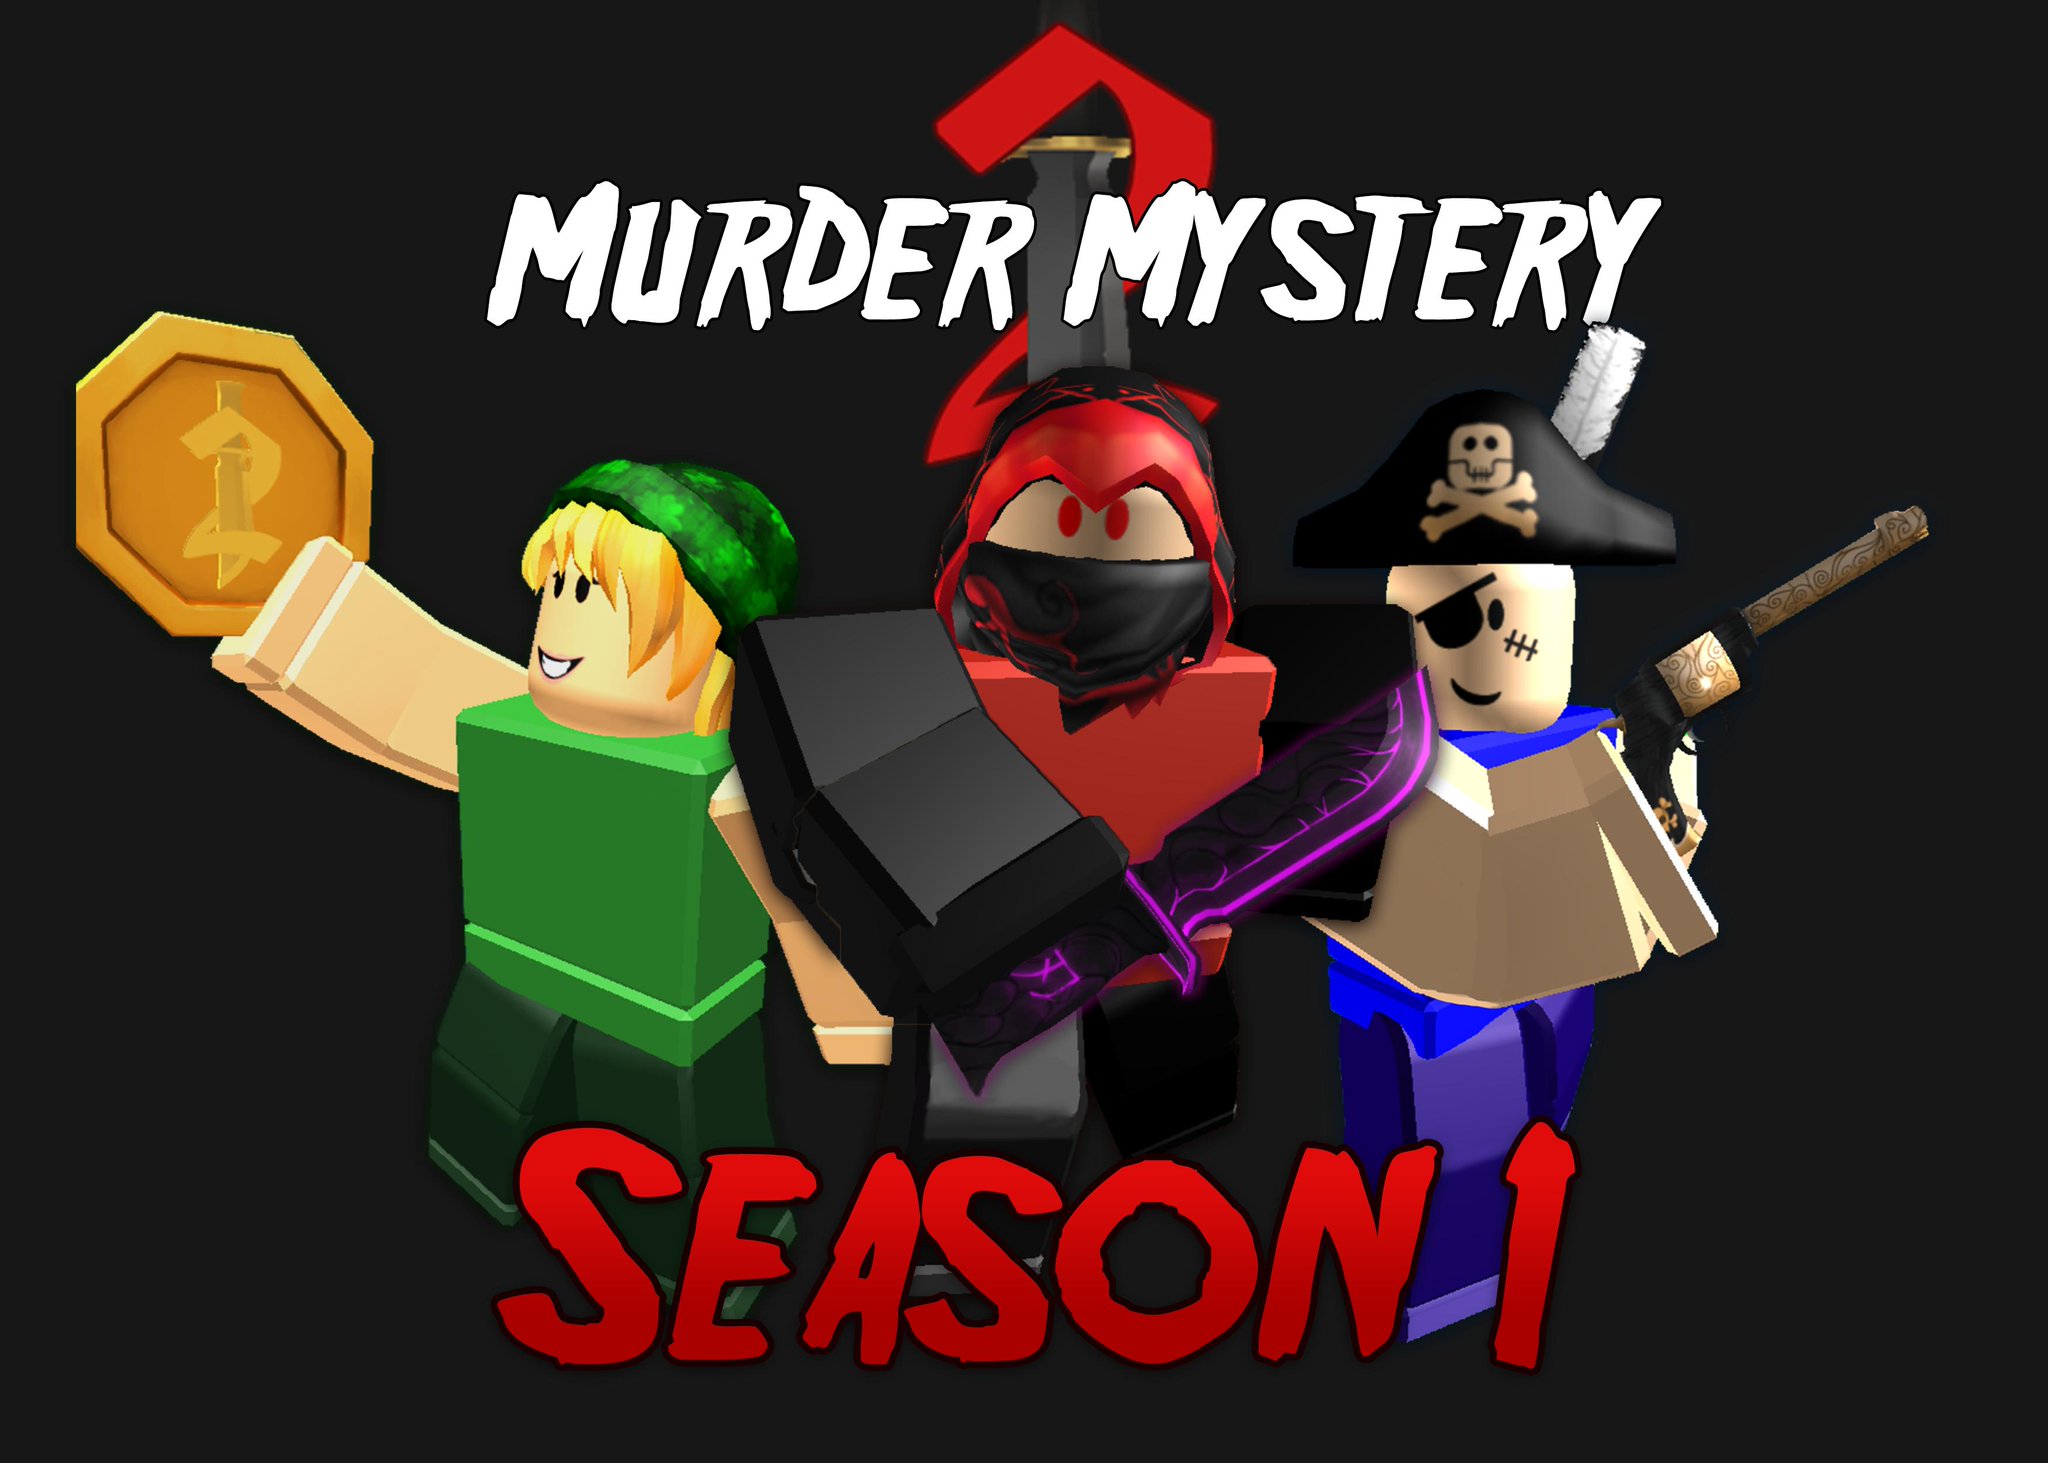 Nikilis On Twitter Welcome To Murder Mystery 2 Season 1 Coming Soon - roblox twitter nikilis get robux points